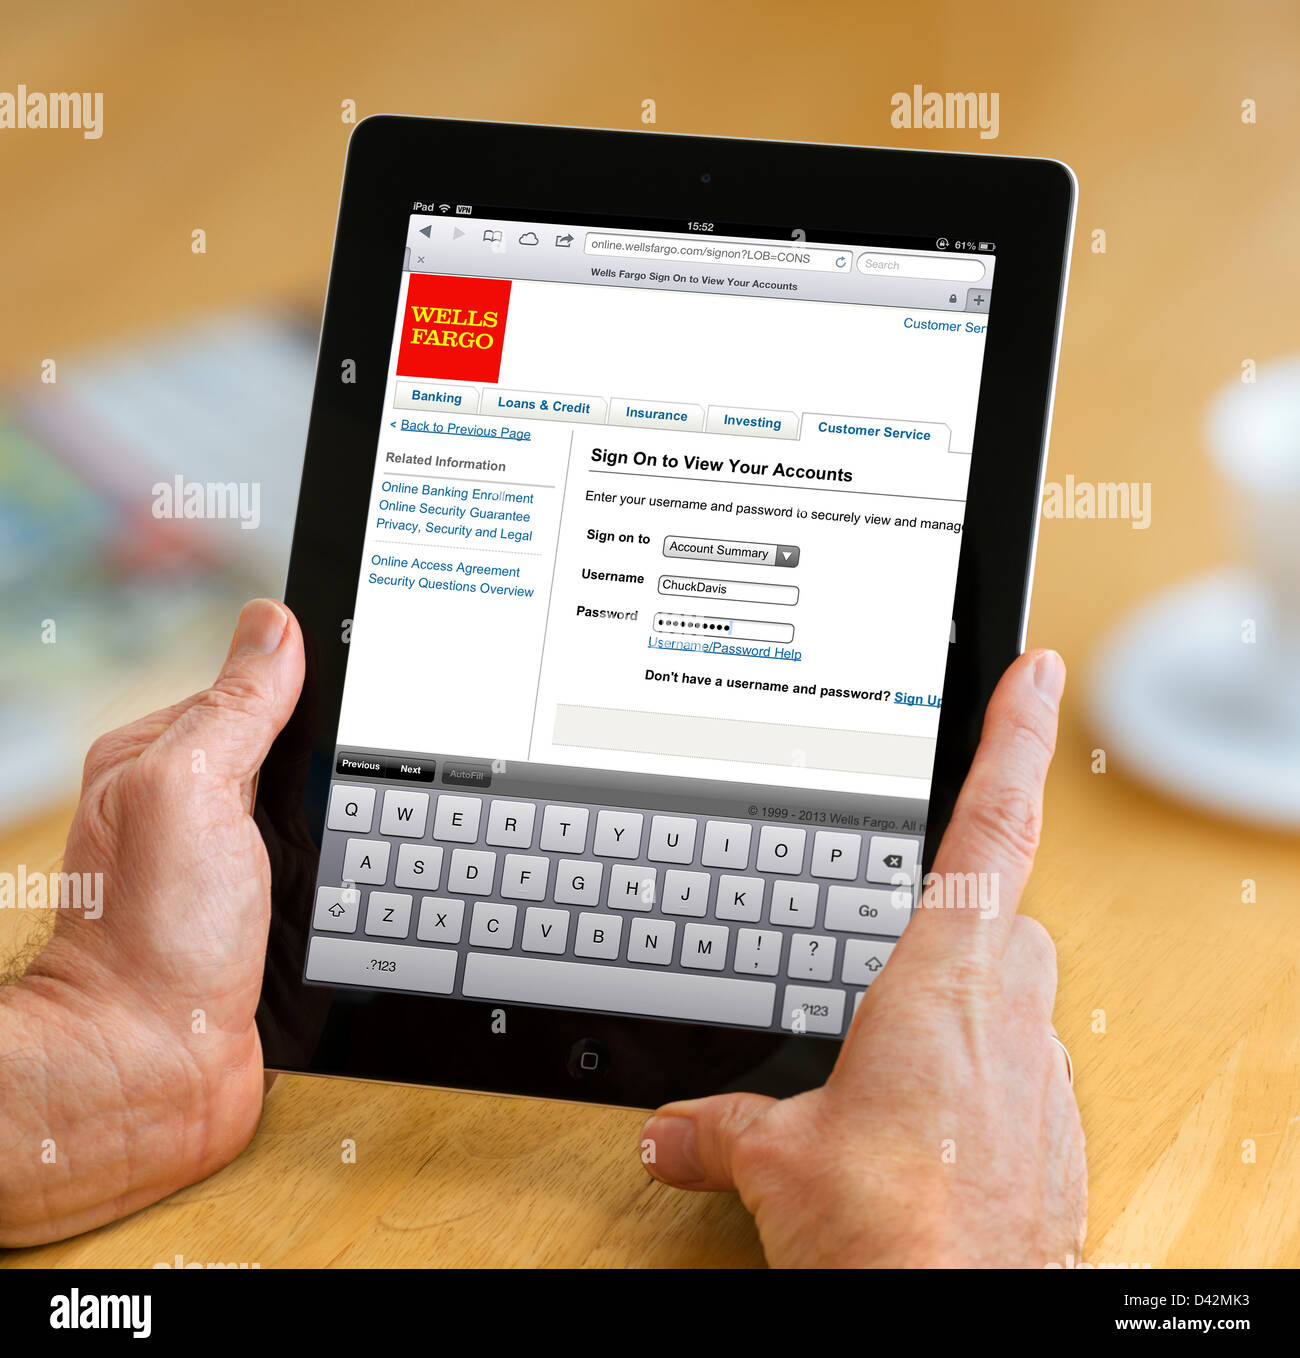 Logging on to a Wells Fargo bank account on an iPad 4, USA Stock Photo